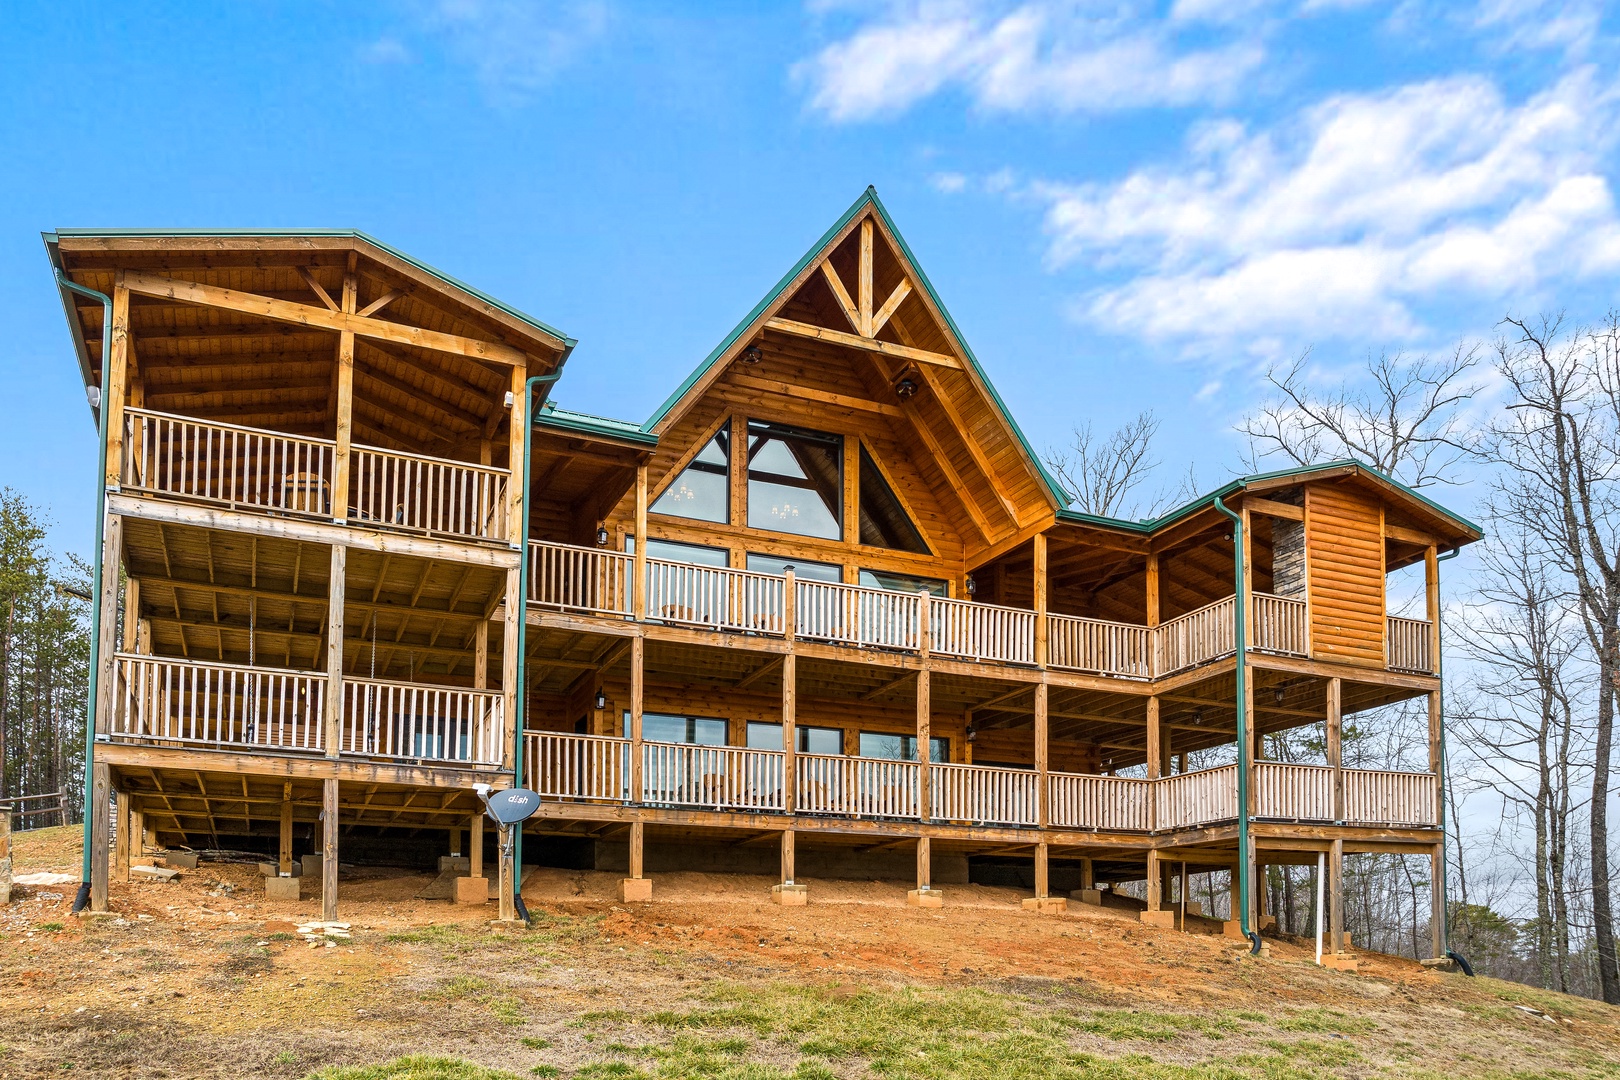 Exterior back view at Four Seasons Grand, a 5 bedroom cabin rental located in Pigeon Forge